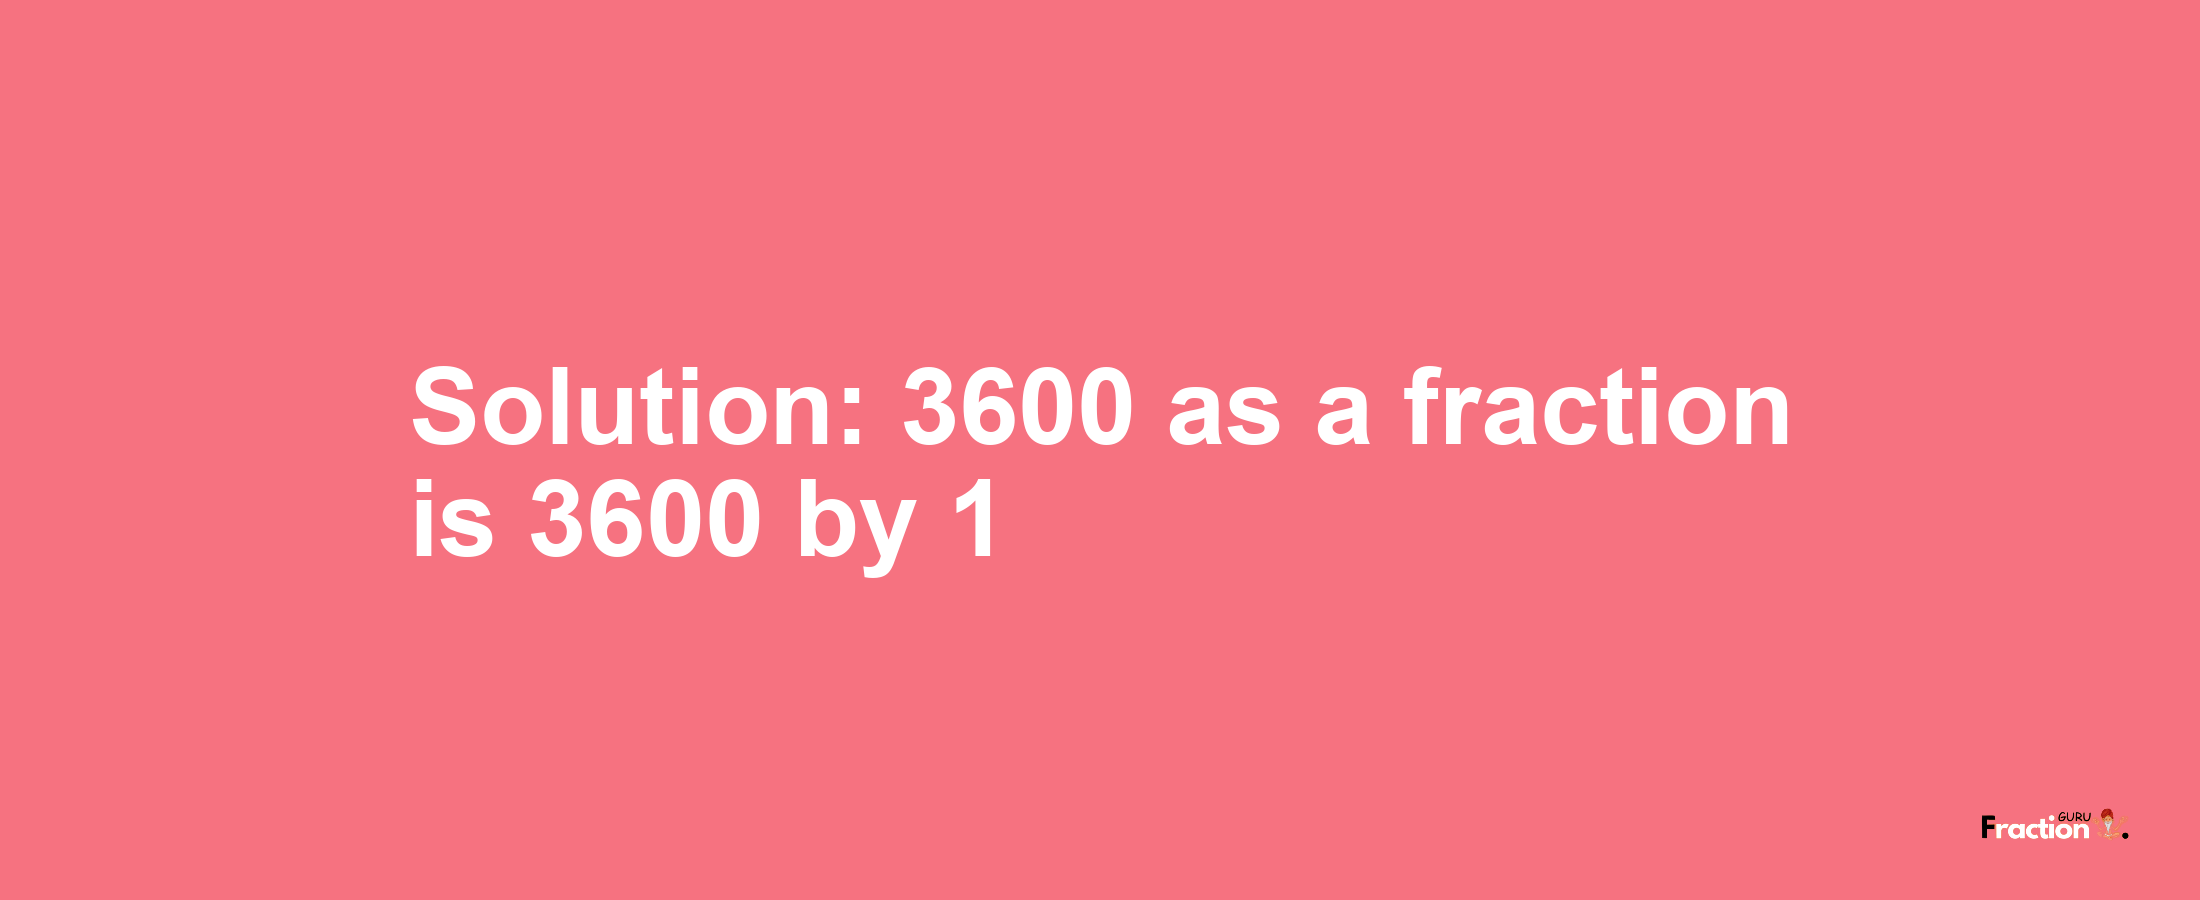 Solution:3600 as a fraction is 3600/1